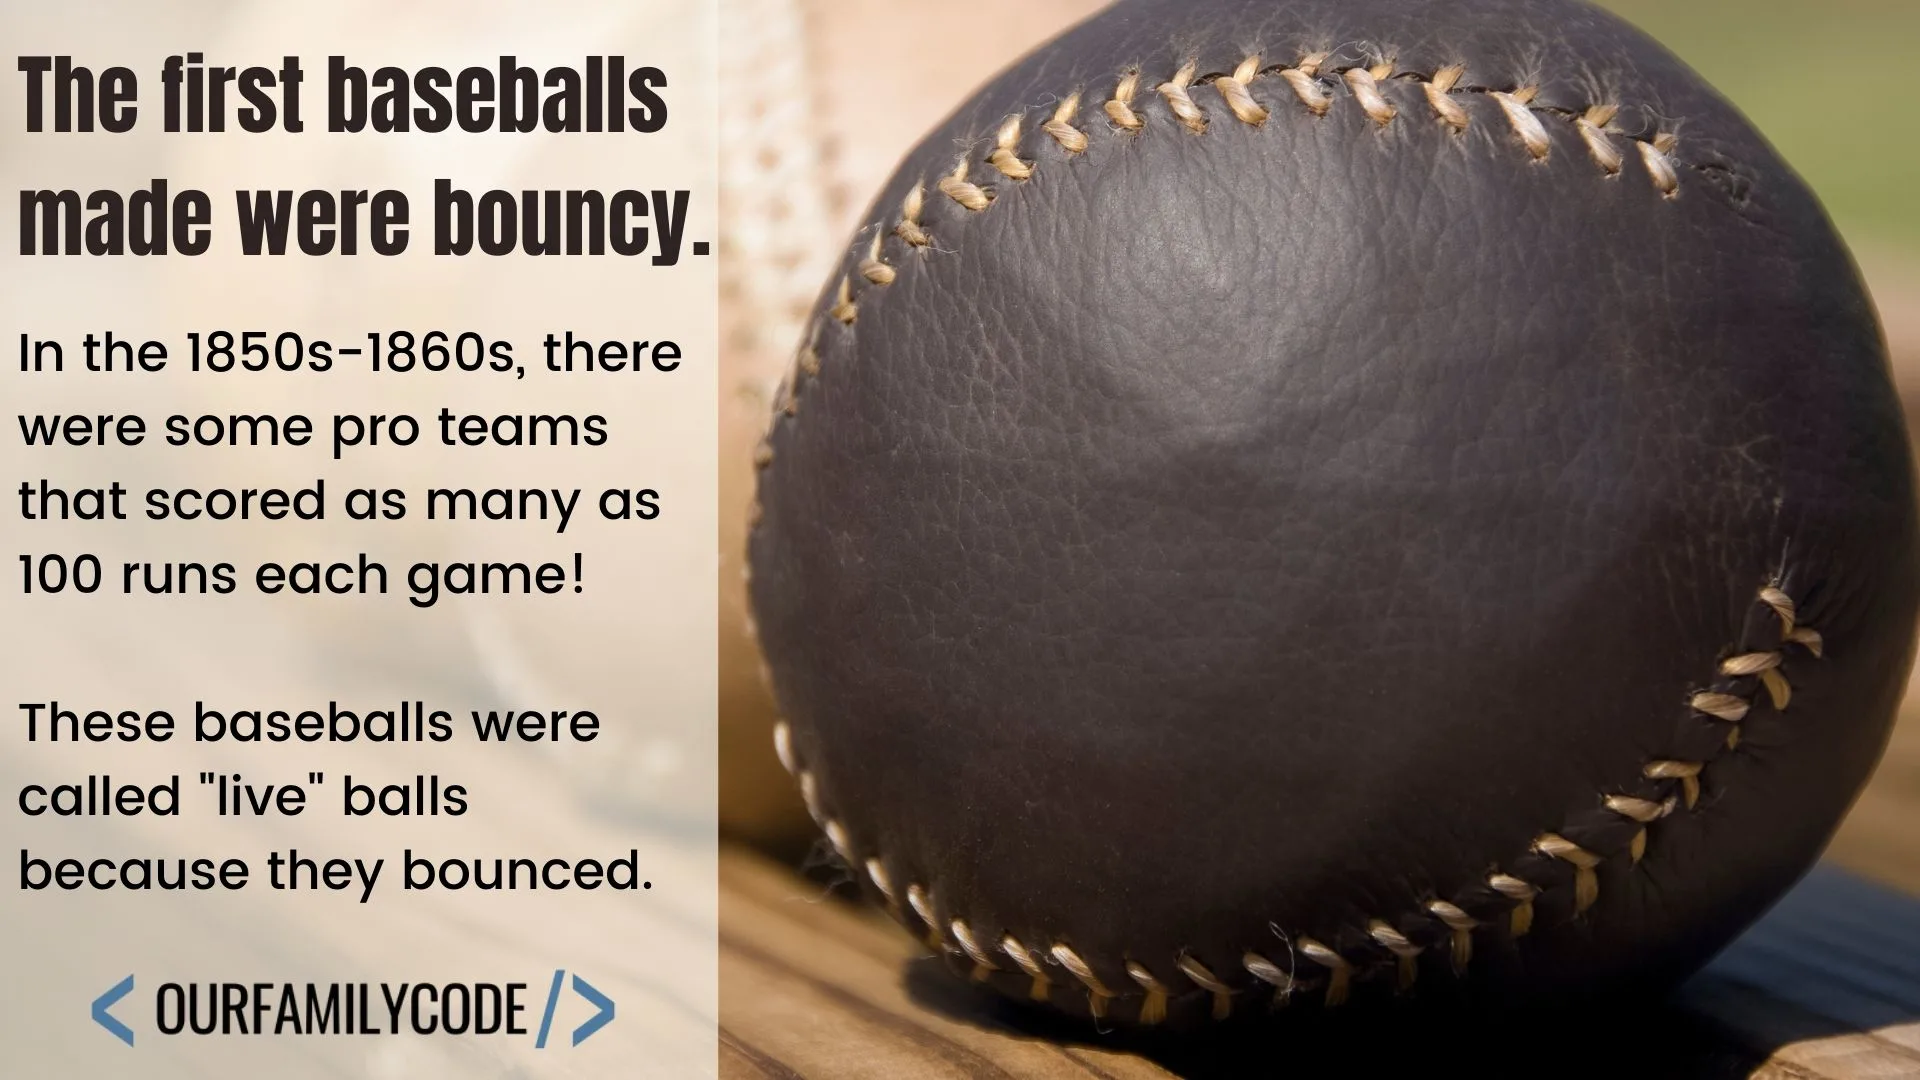 A picture of an old baseball made in a lemon stitch style with text that says "the first baseballs made were bouncy."